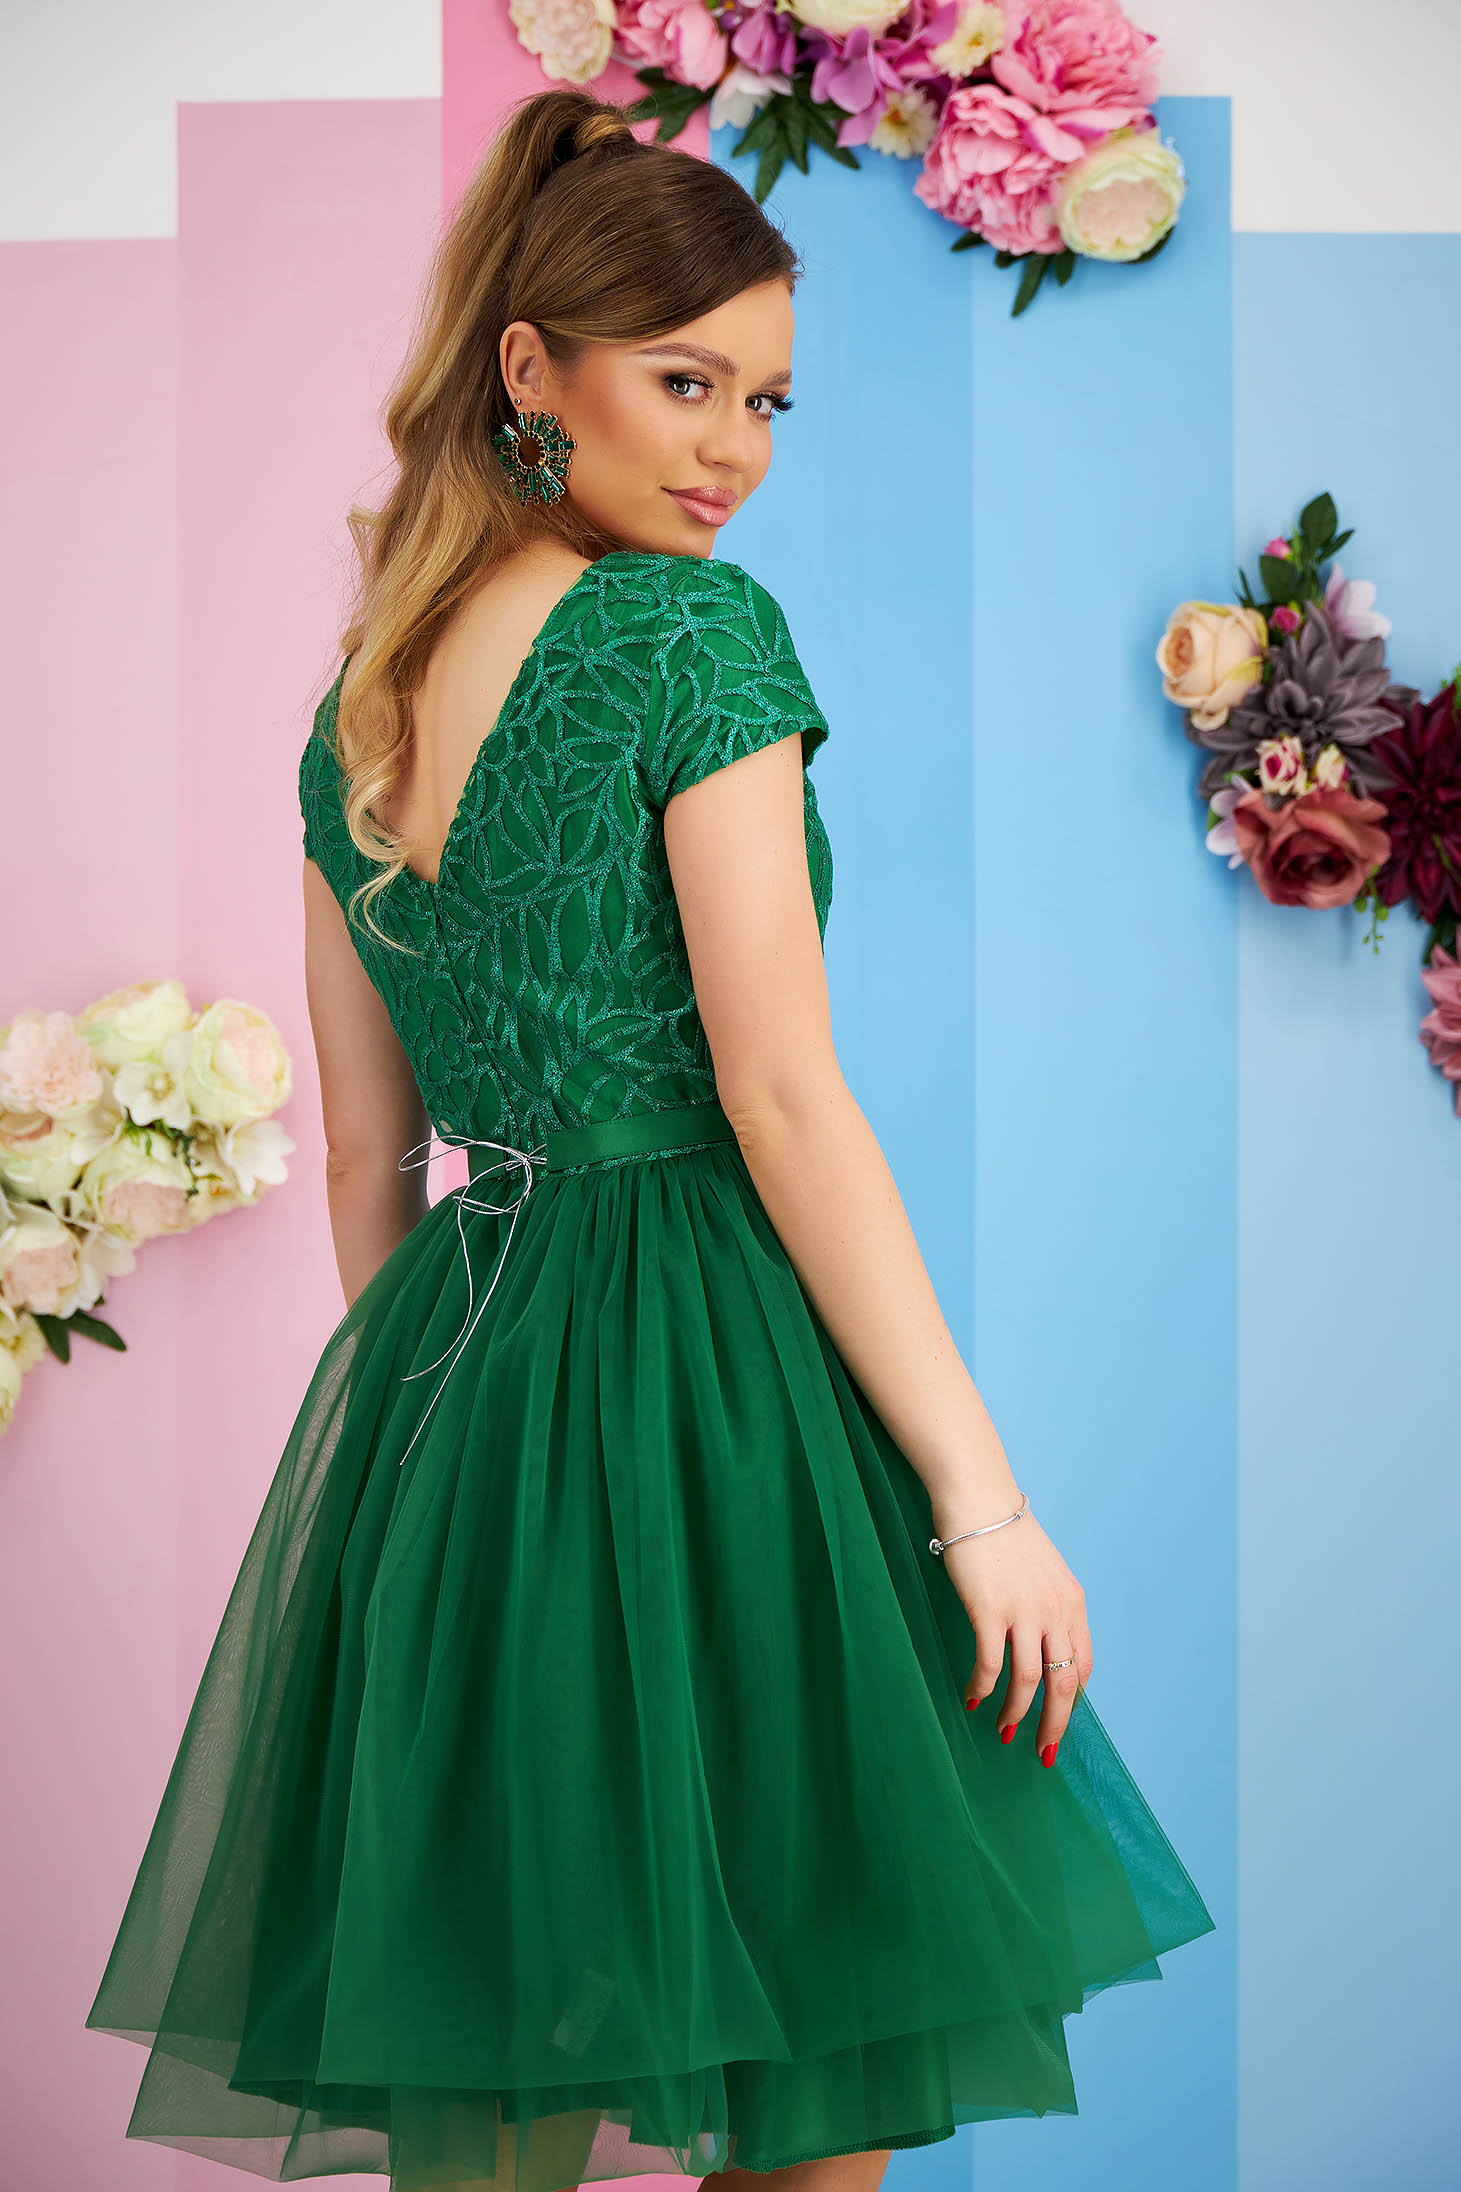 Green tulle and lace dress in a skater style with glitter applications - StarShinerS 3 - StarShinerS.com